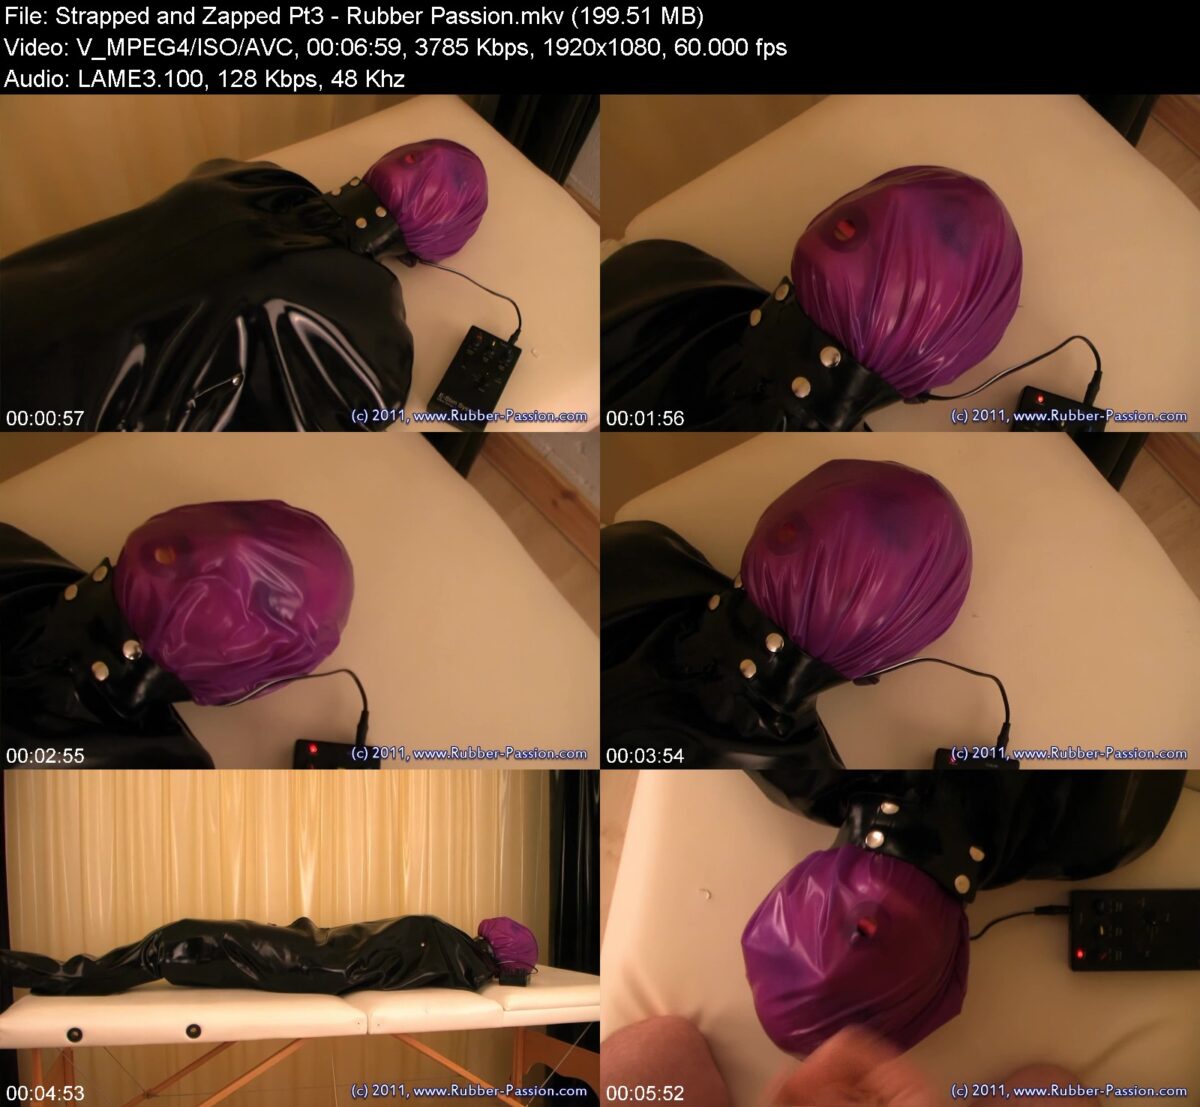 Strapped & Zapped Pt3 in Rubber Passion